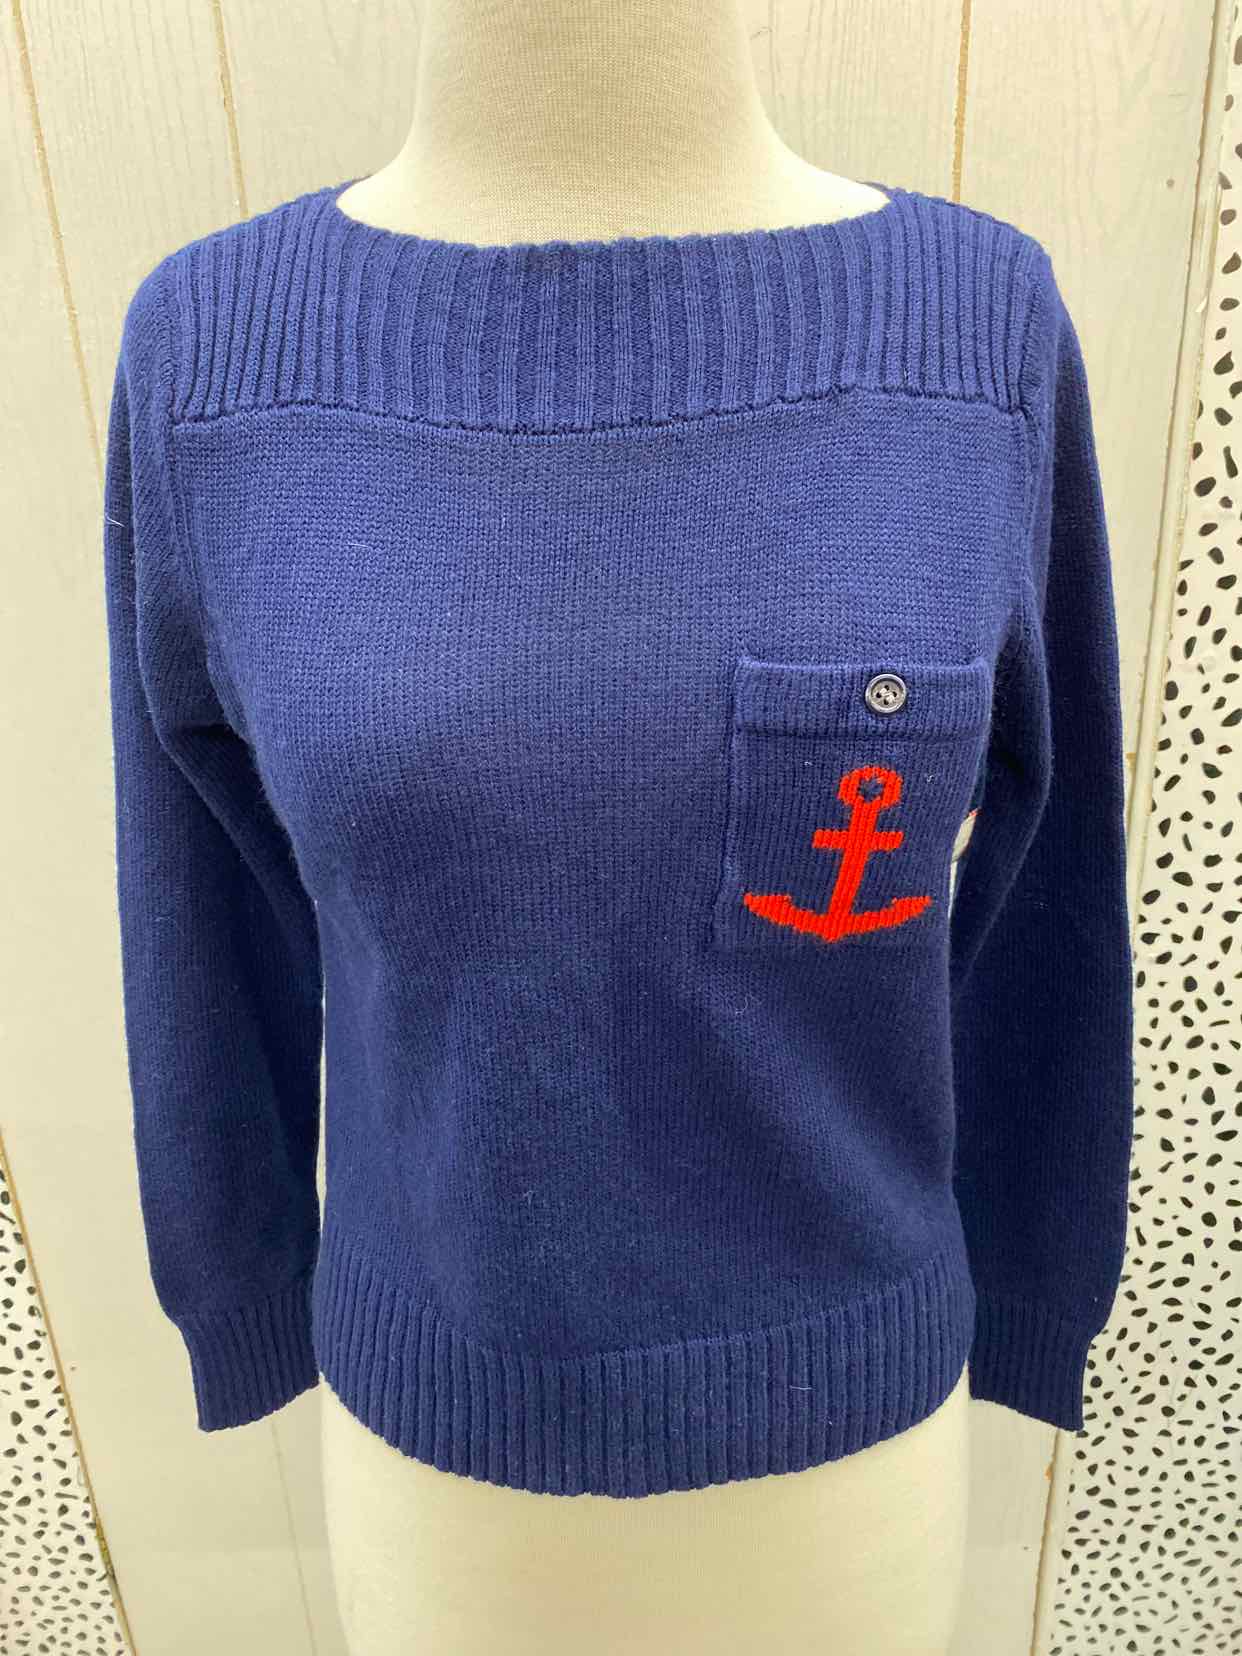 Bobbie Brooks Navy Womens Size Small Sweater – Twice As Nice Consignments